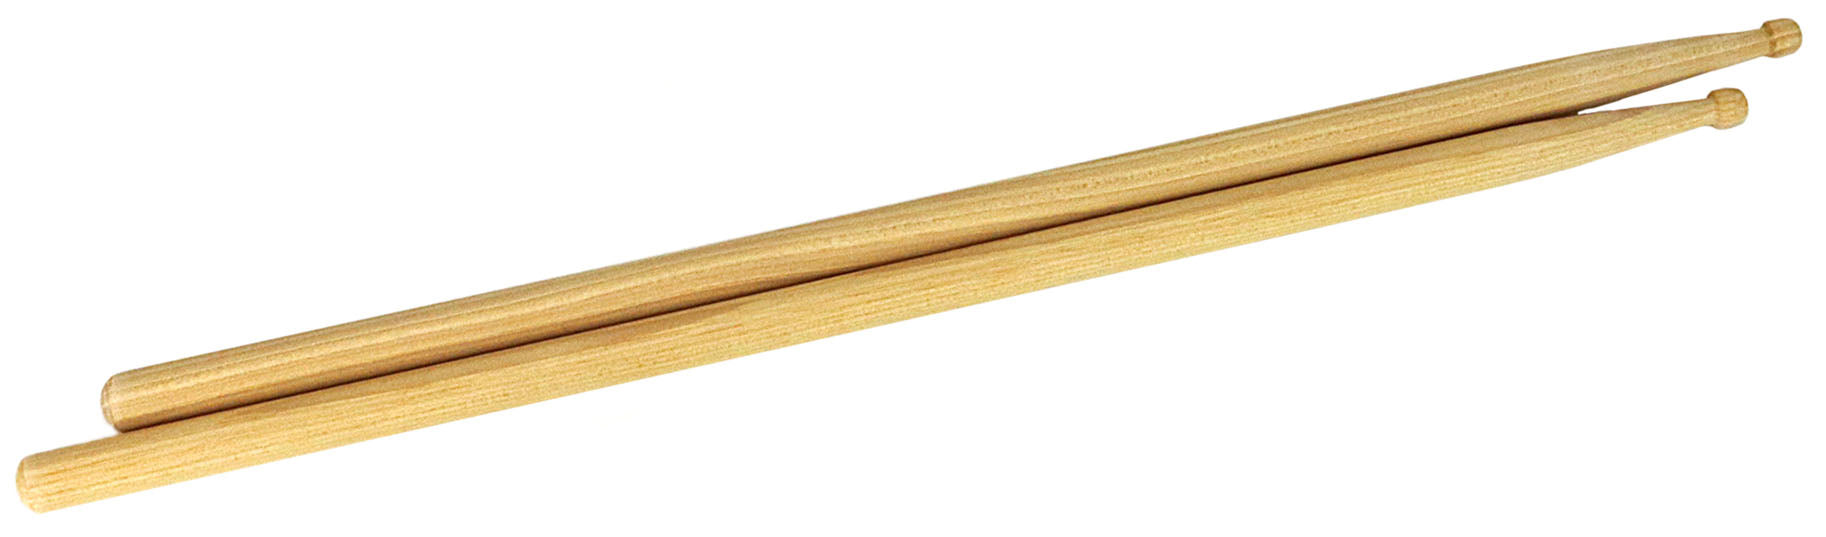 JS3DW Economy Drumsticks with WoodenTips - One Pair